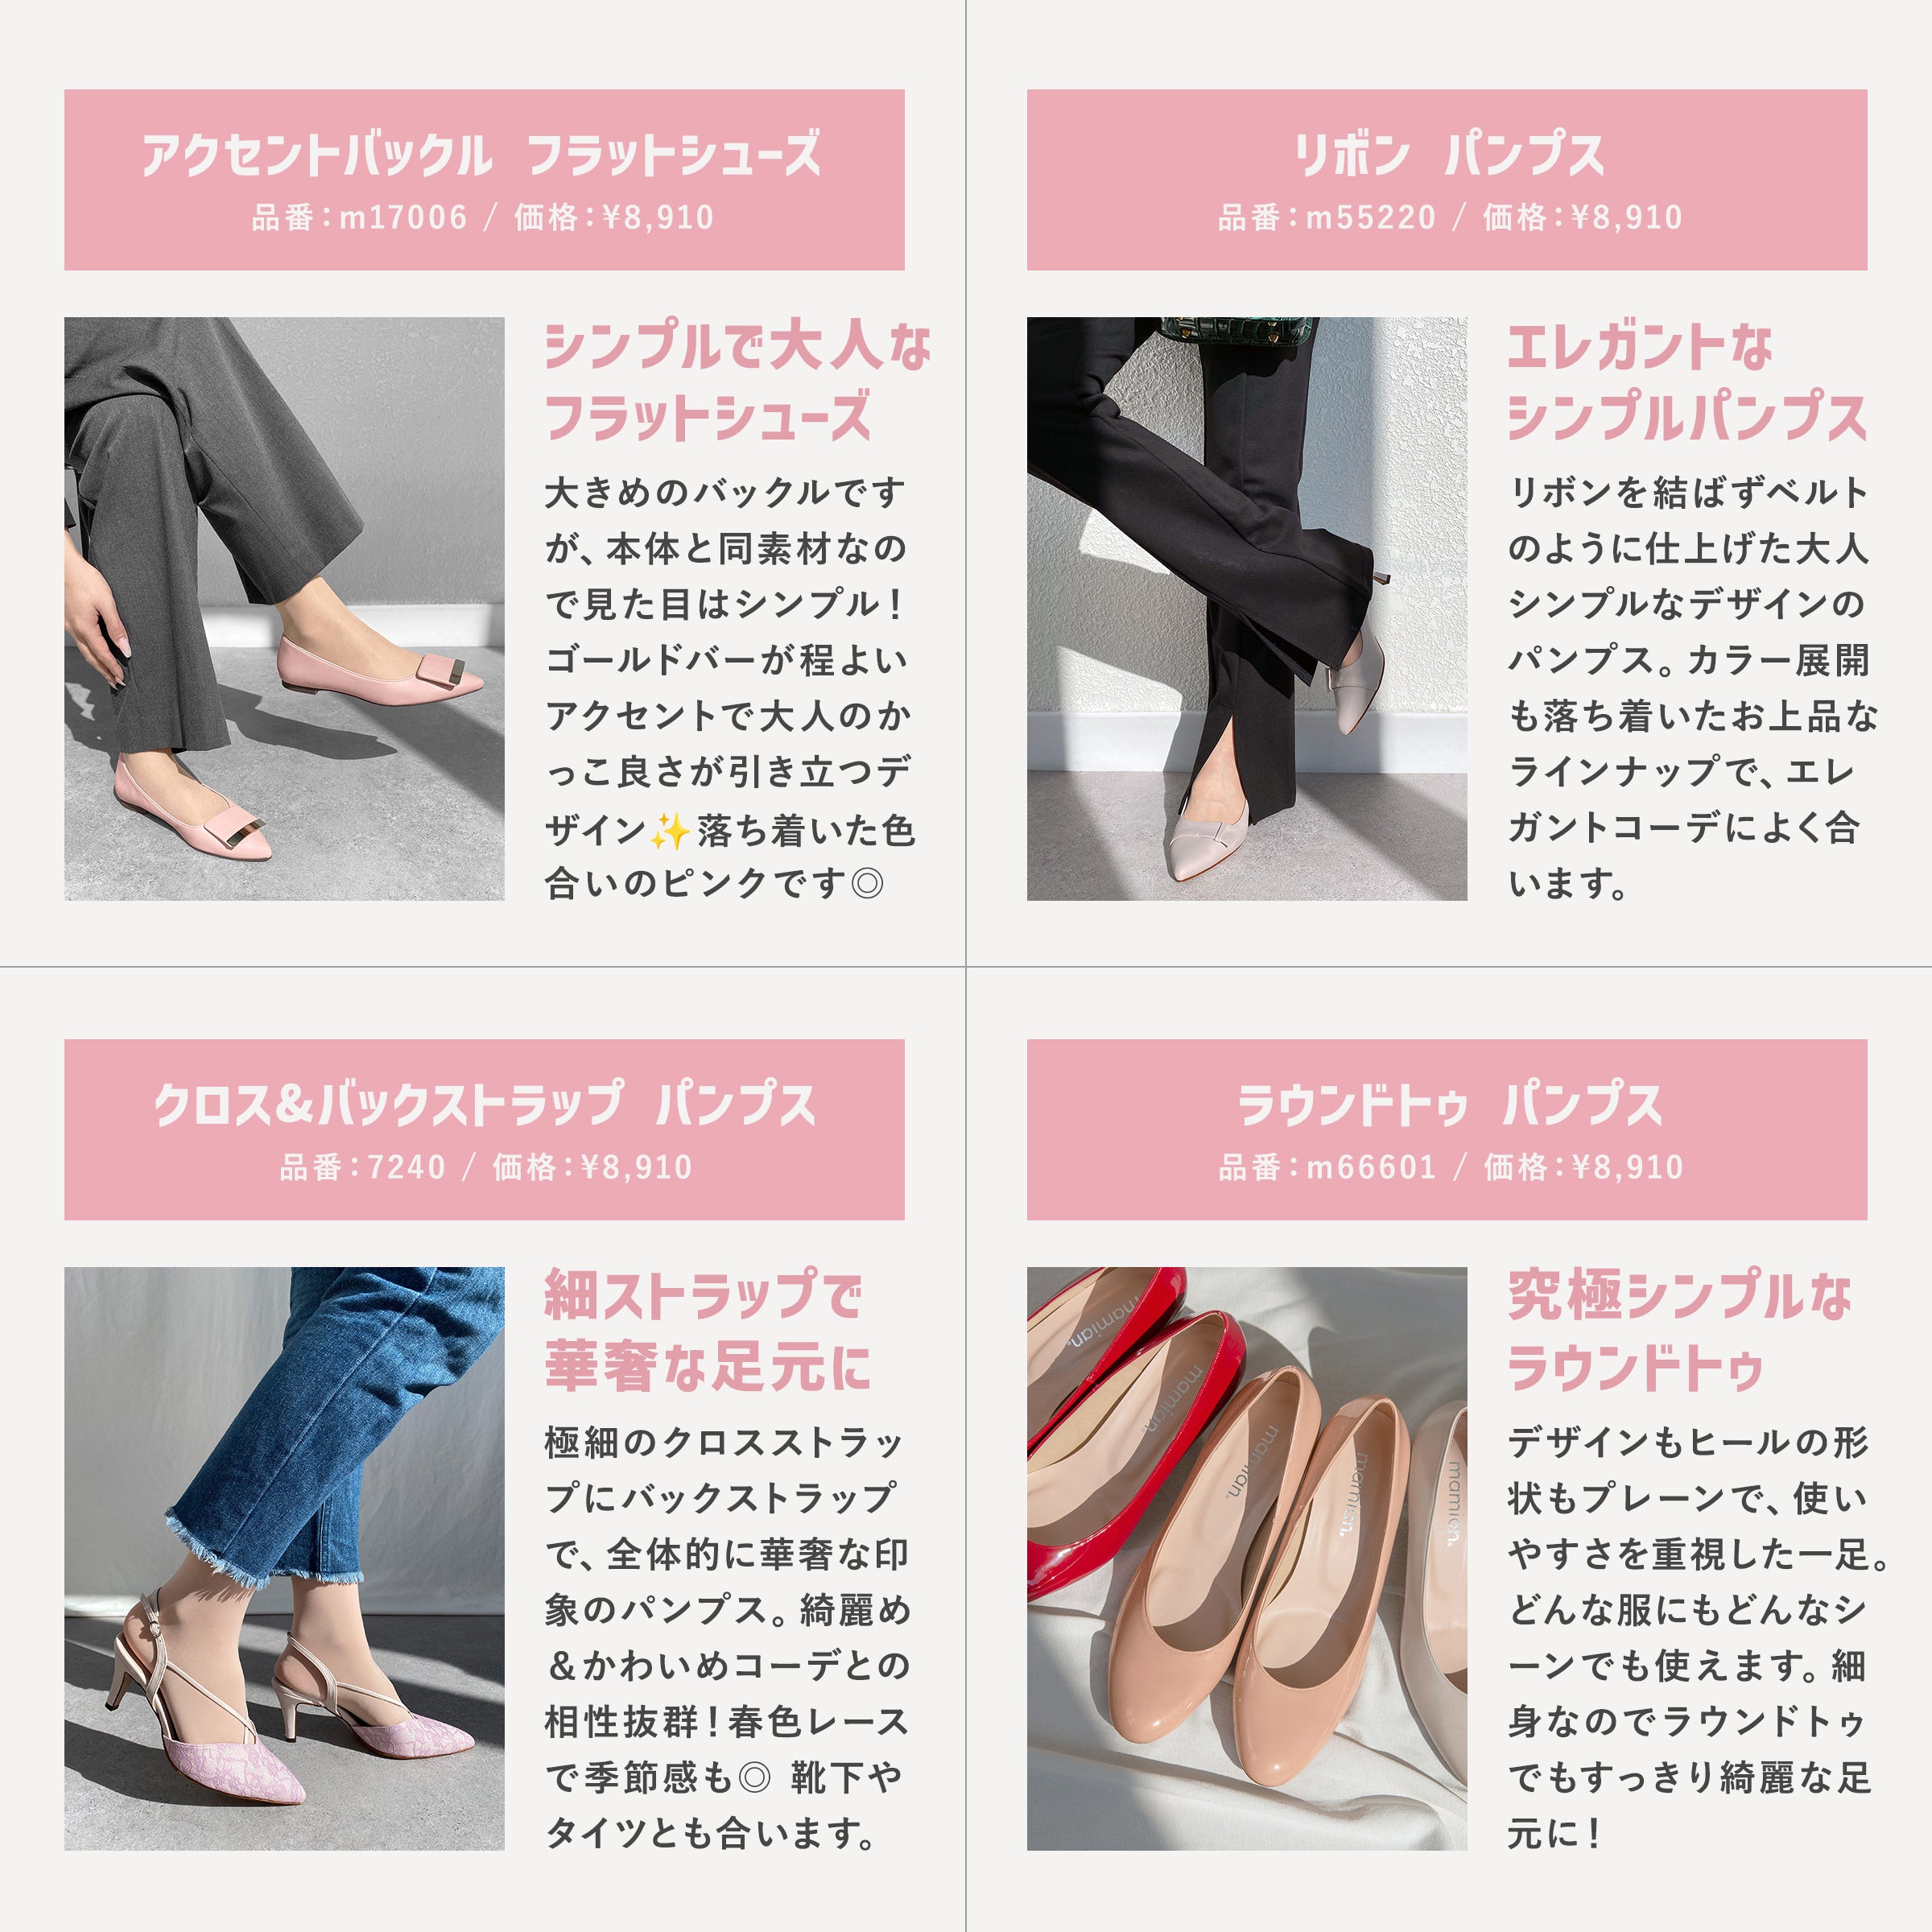 Perfect for spring ♡ Pink shoes special feature